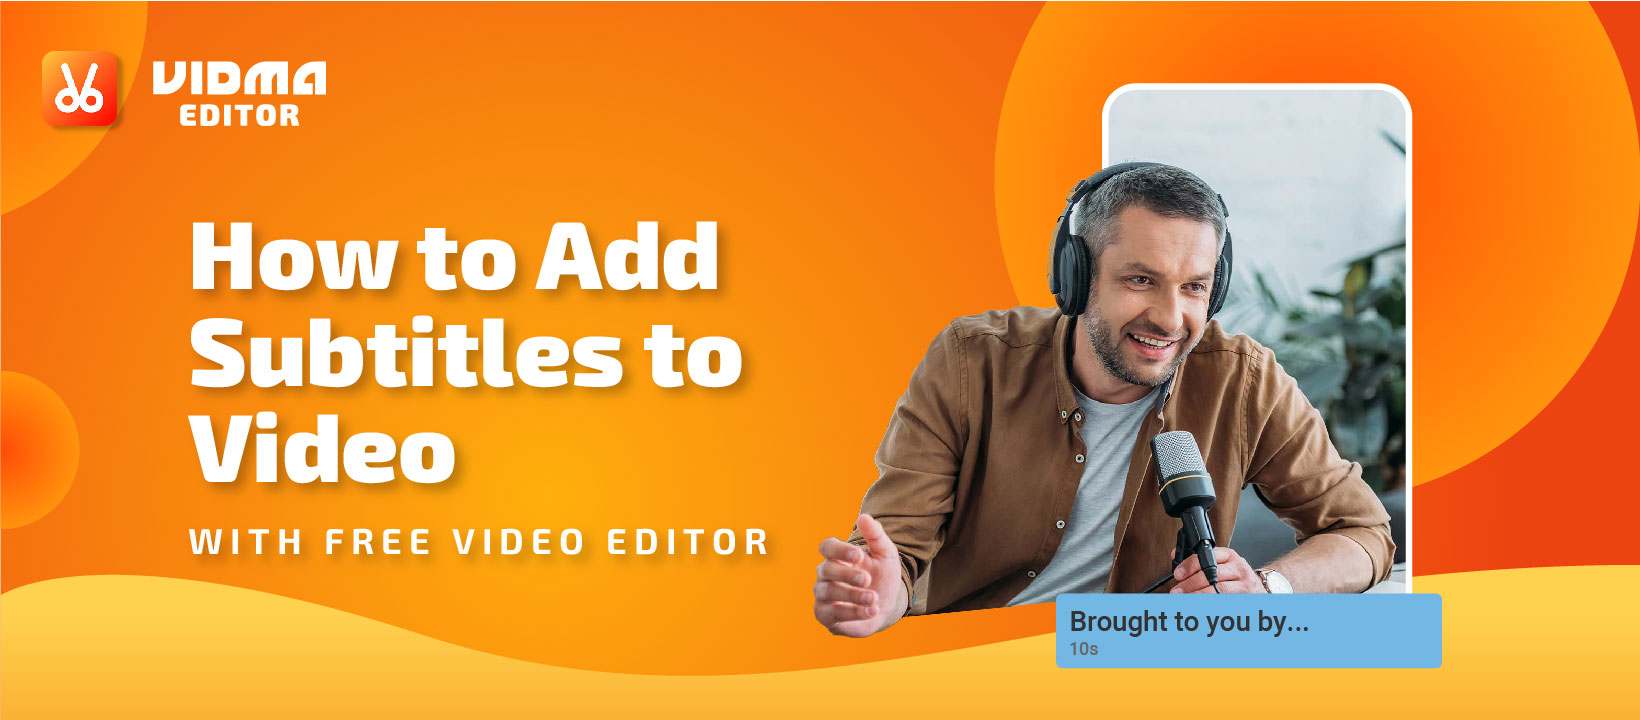 How to Add Subtitles to Video with Free Video Editor?